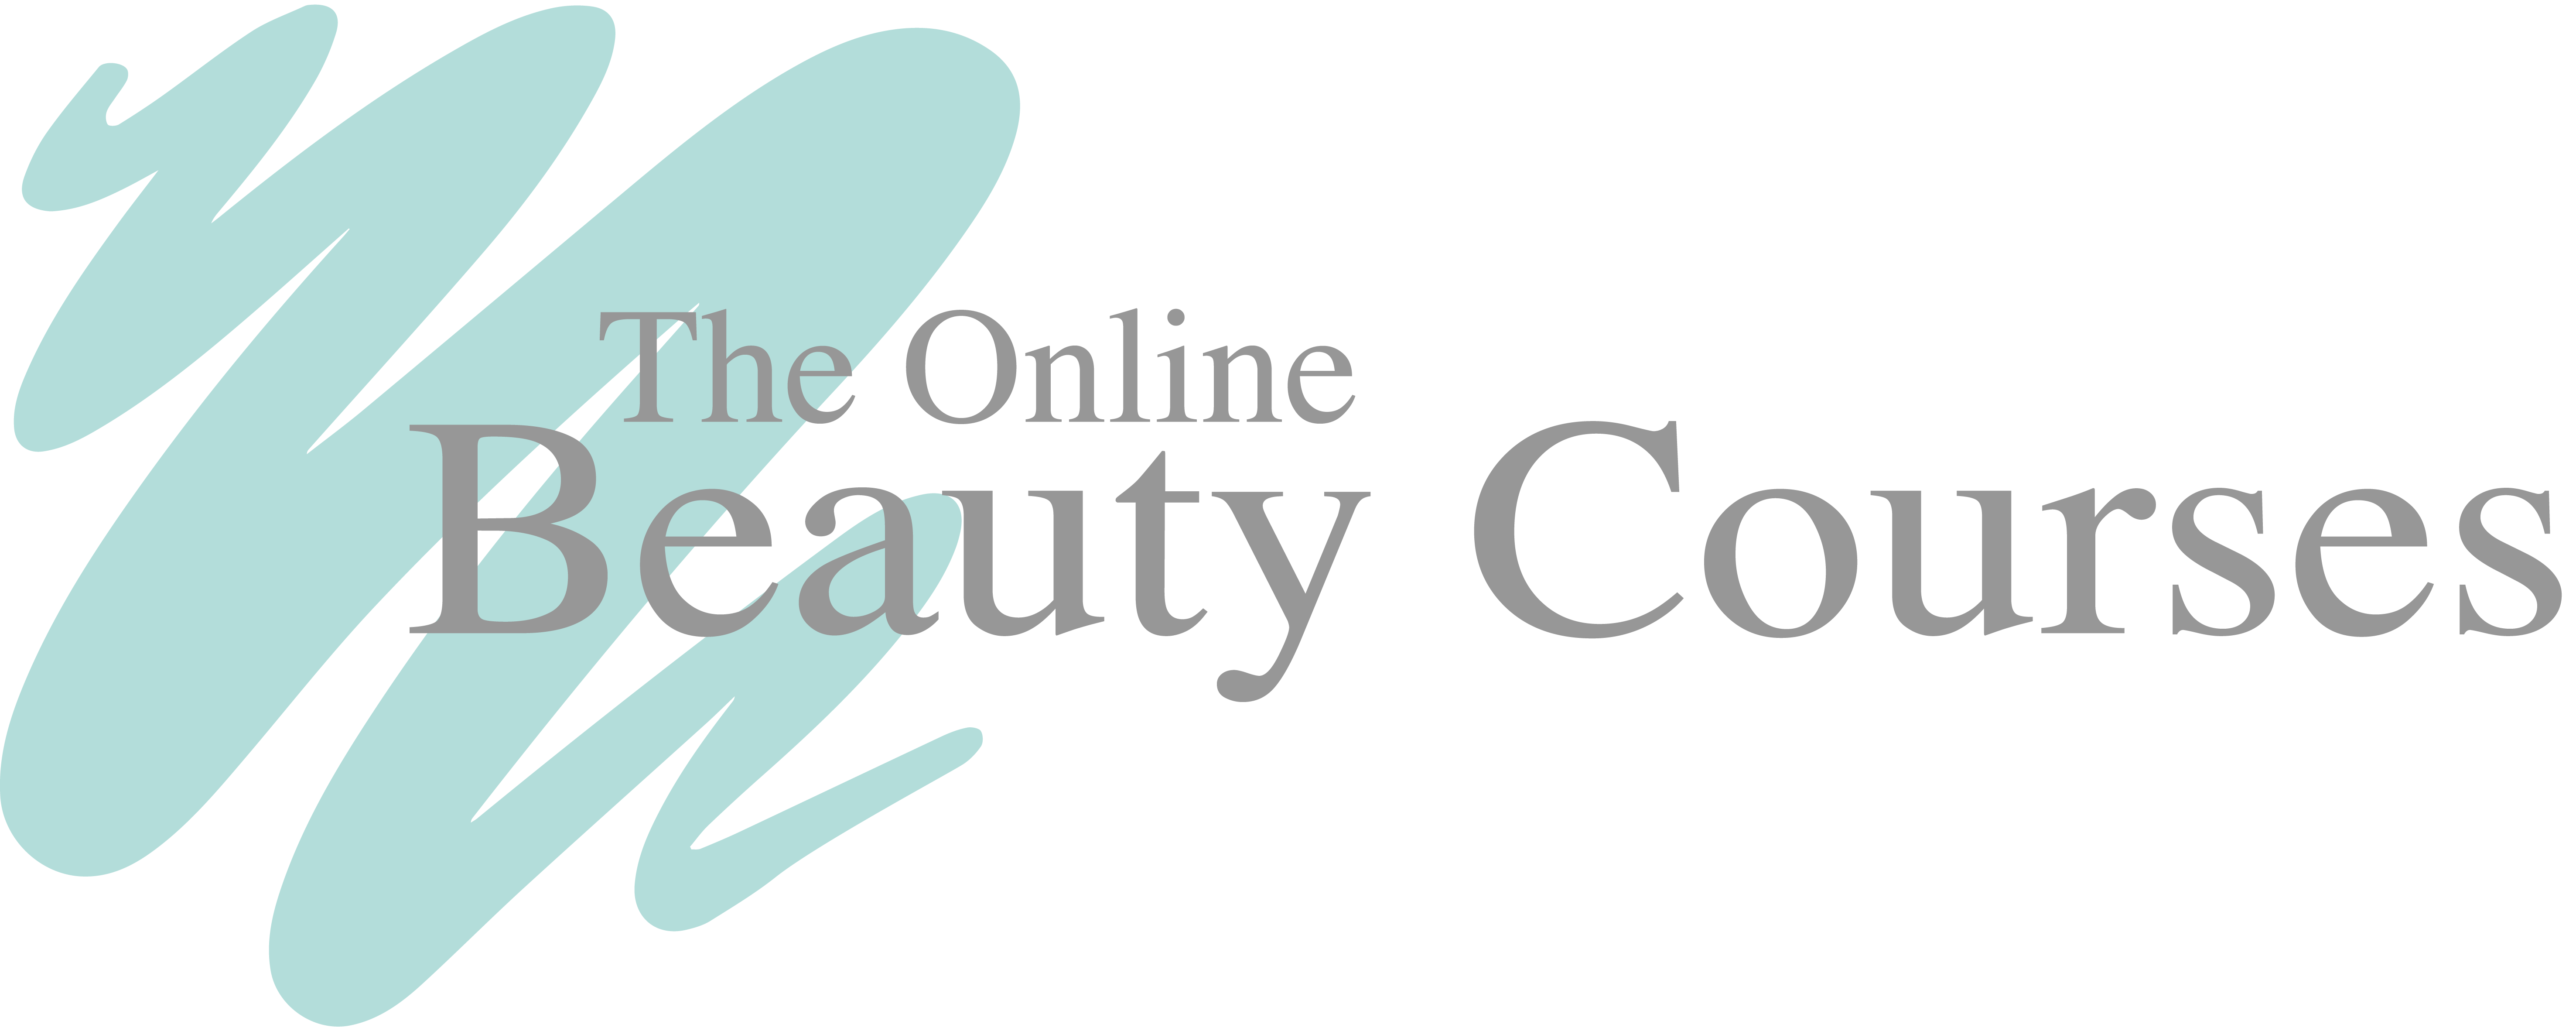 The Online Beauty Courses